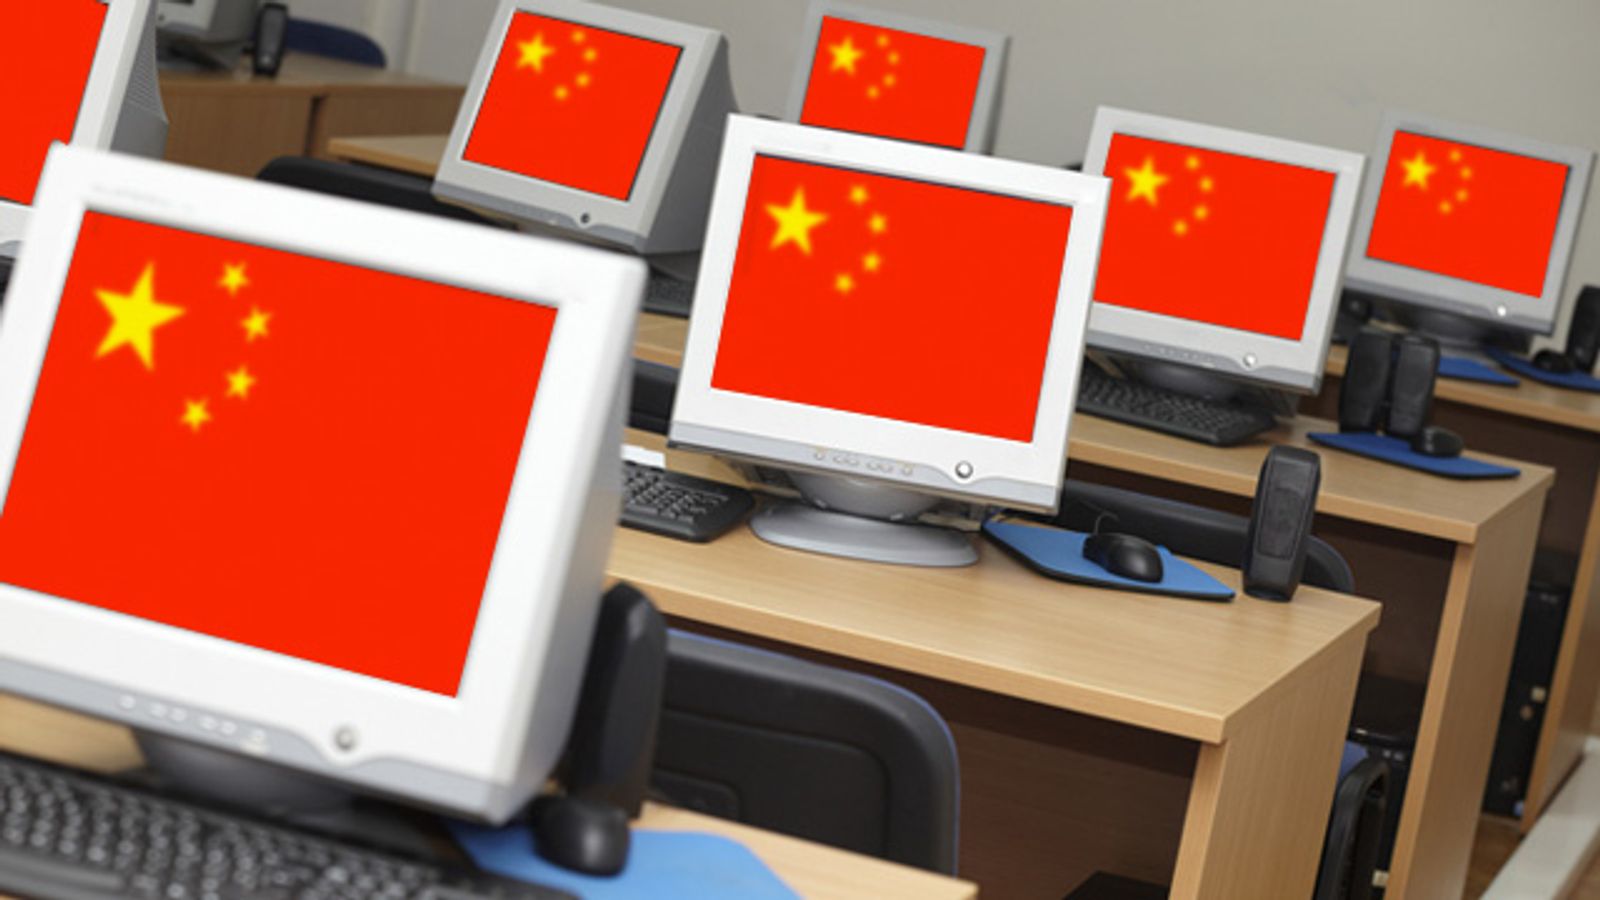 Privacy Oriented Search Engine Blocked in China